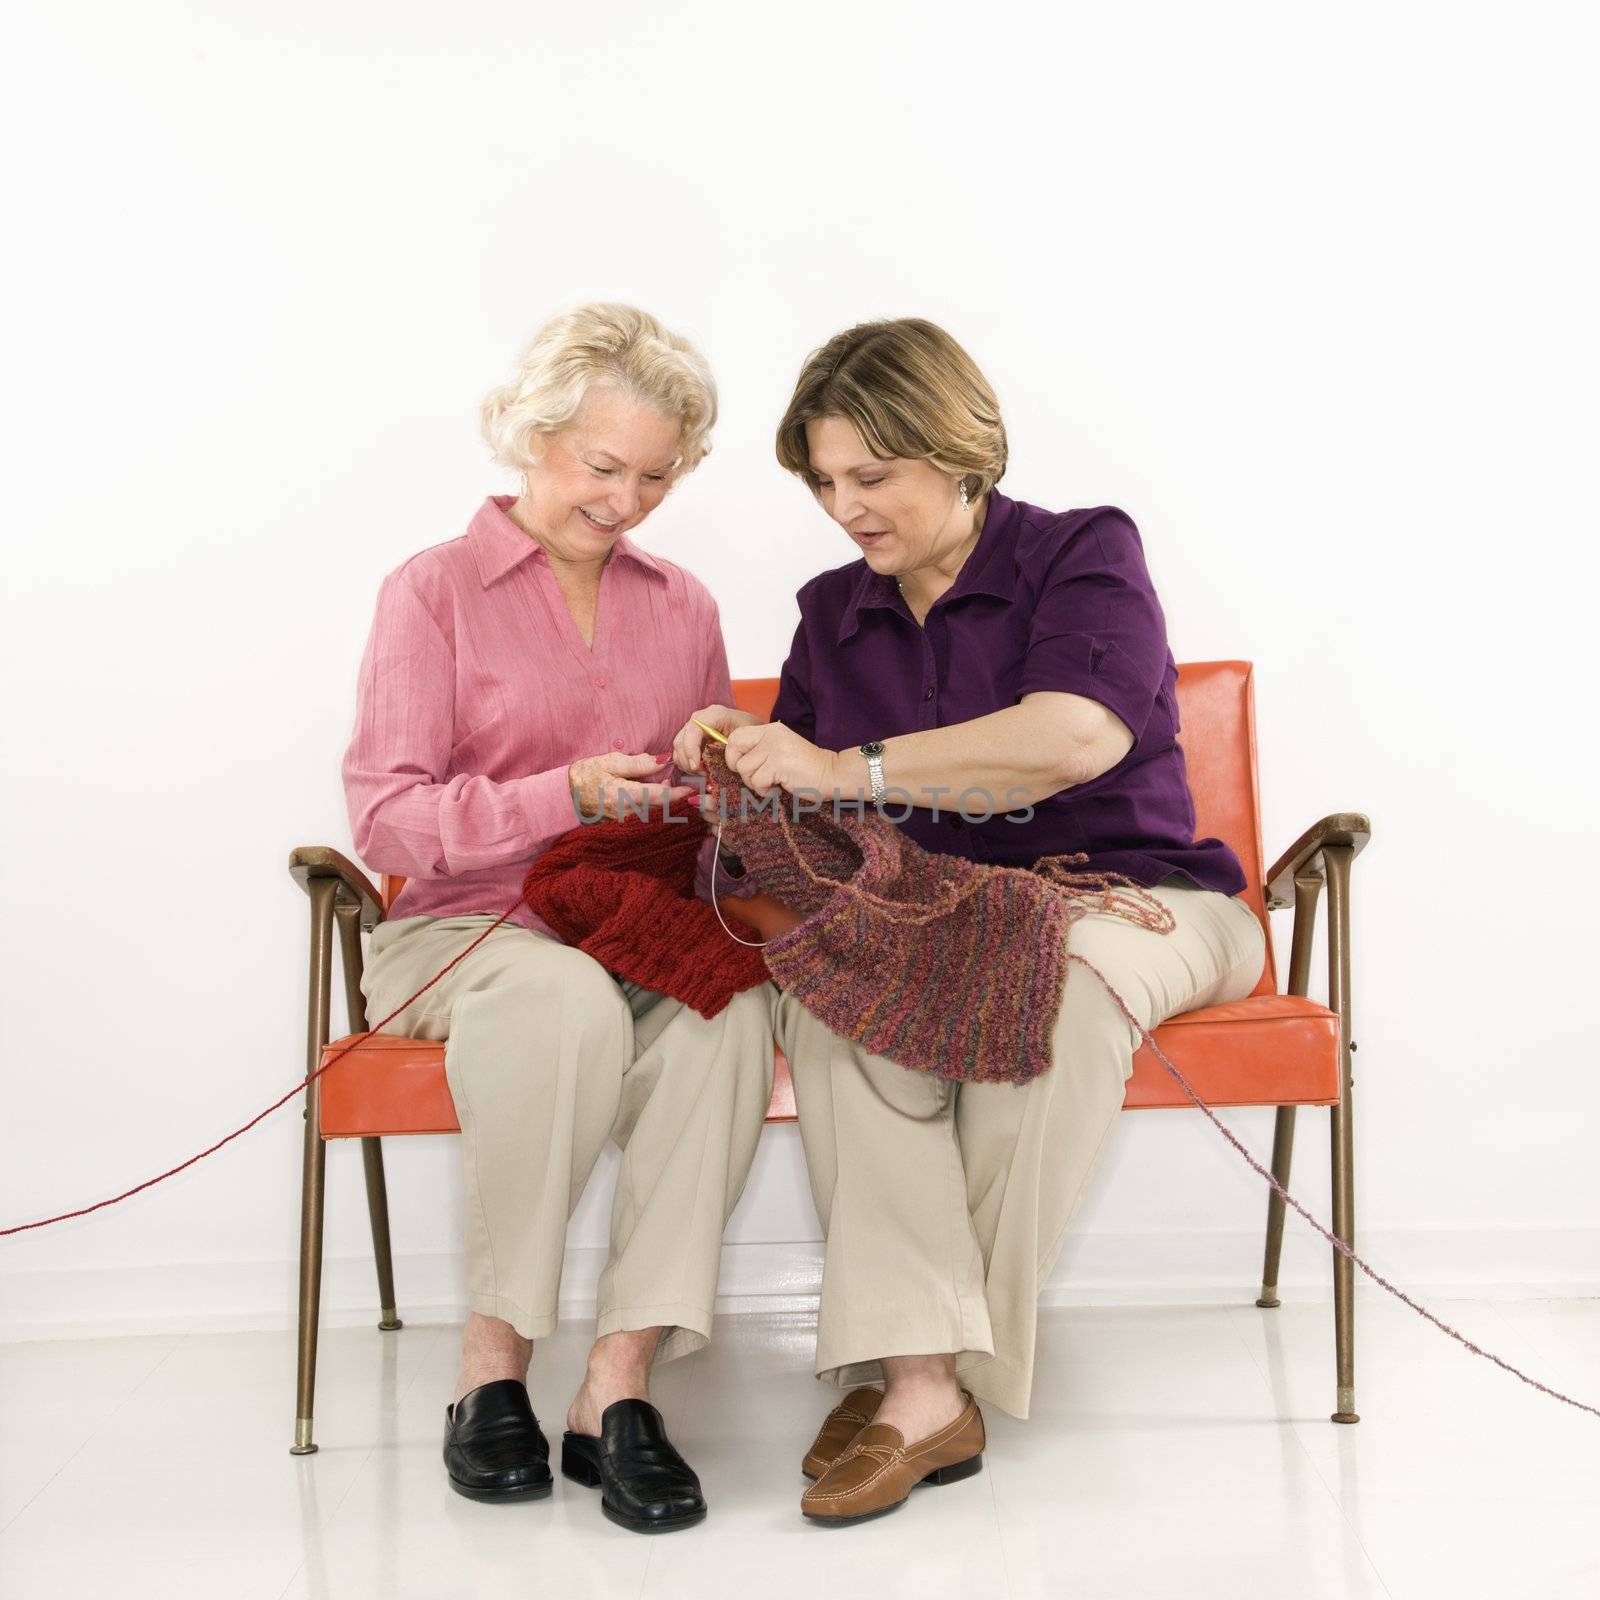 Caucasian middle aged woman and senior woman sitting and knitting.